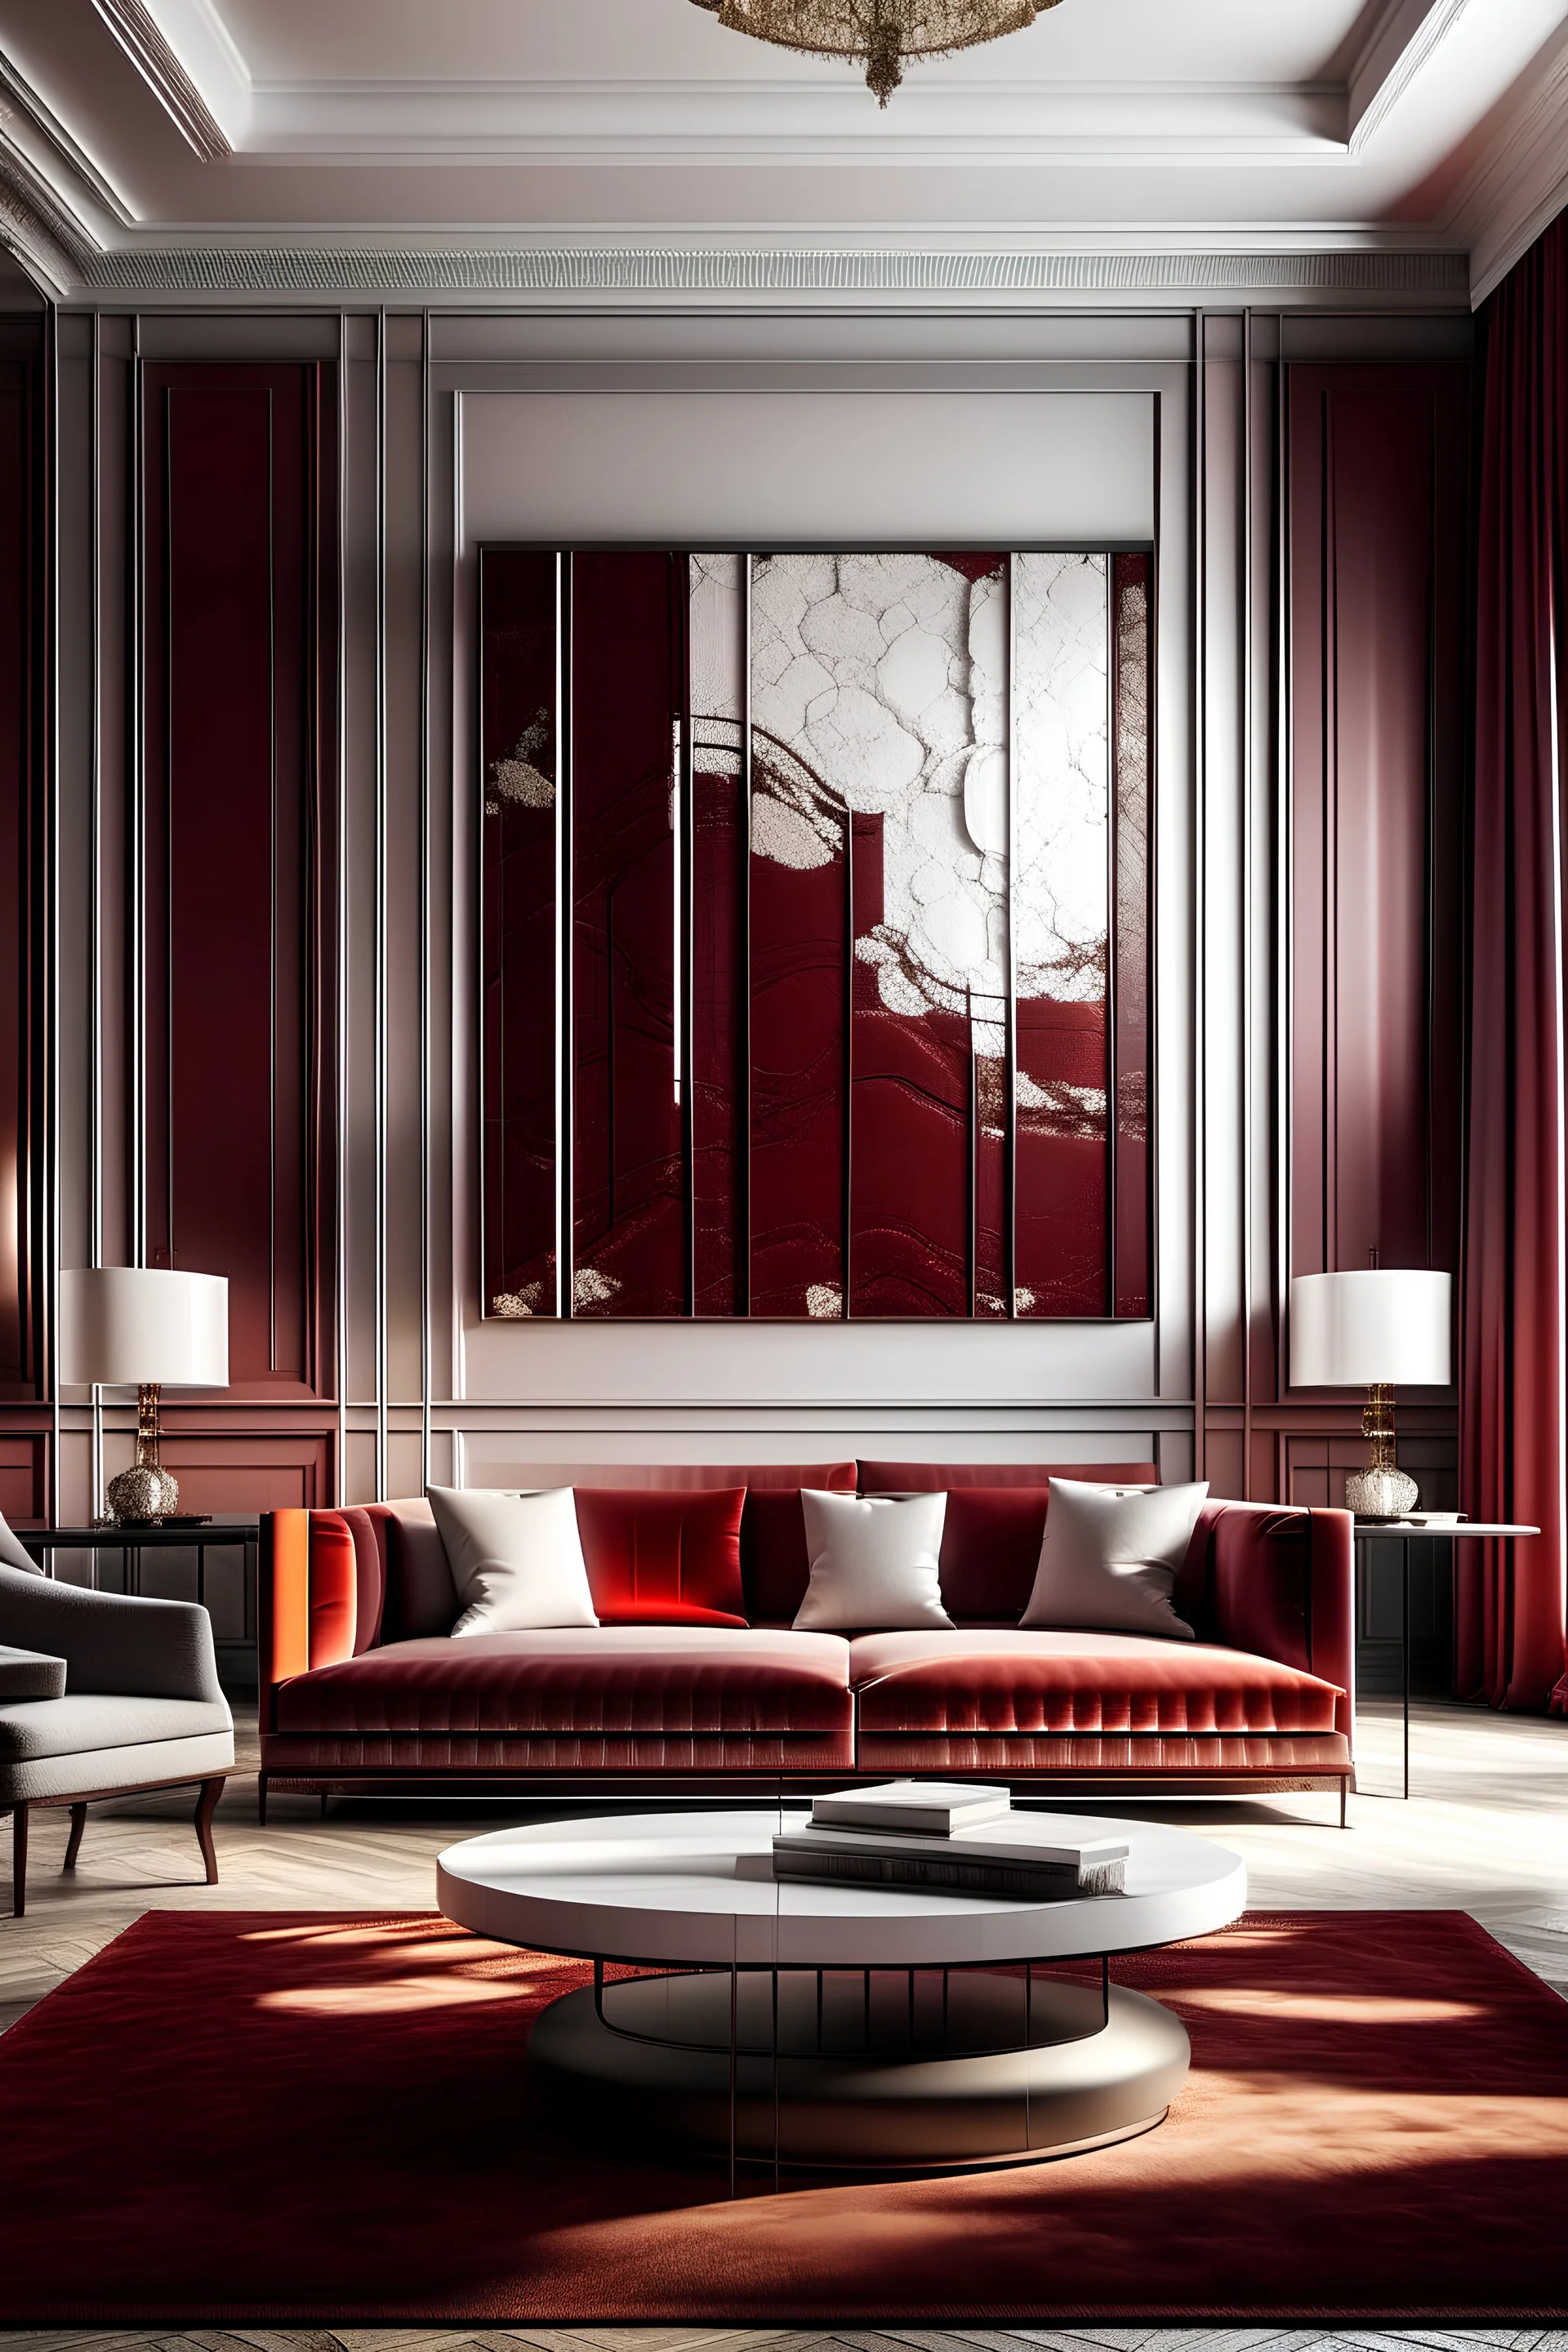 luxurious interior design with a sofa and armchair, large living room with sunlight, white wall panels, dark red wall covering and artwork sculpture